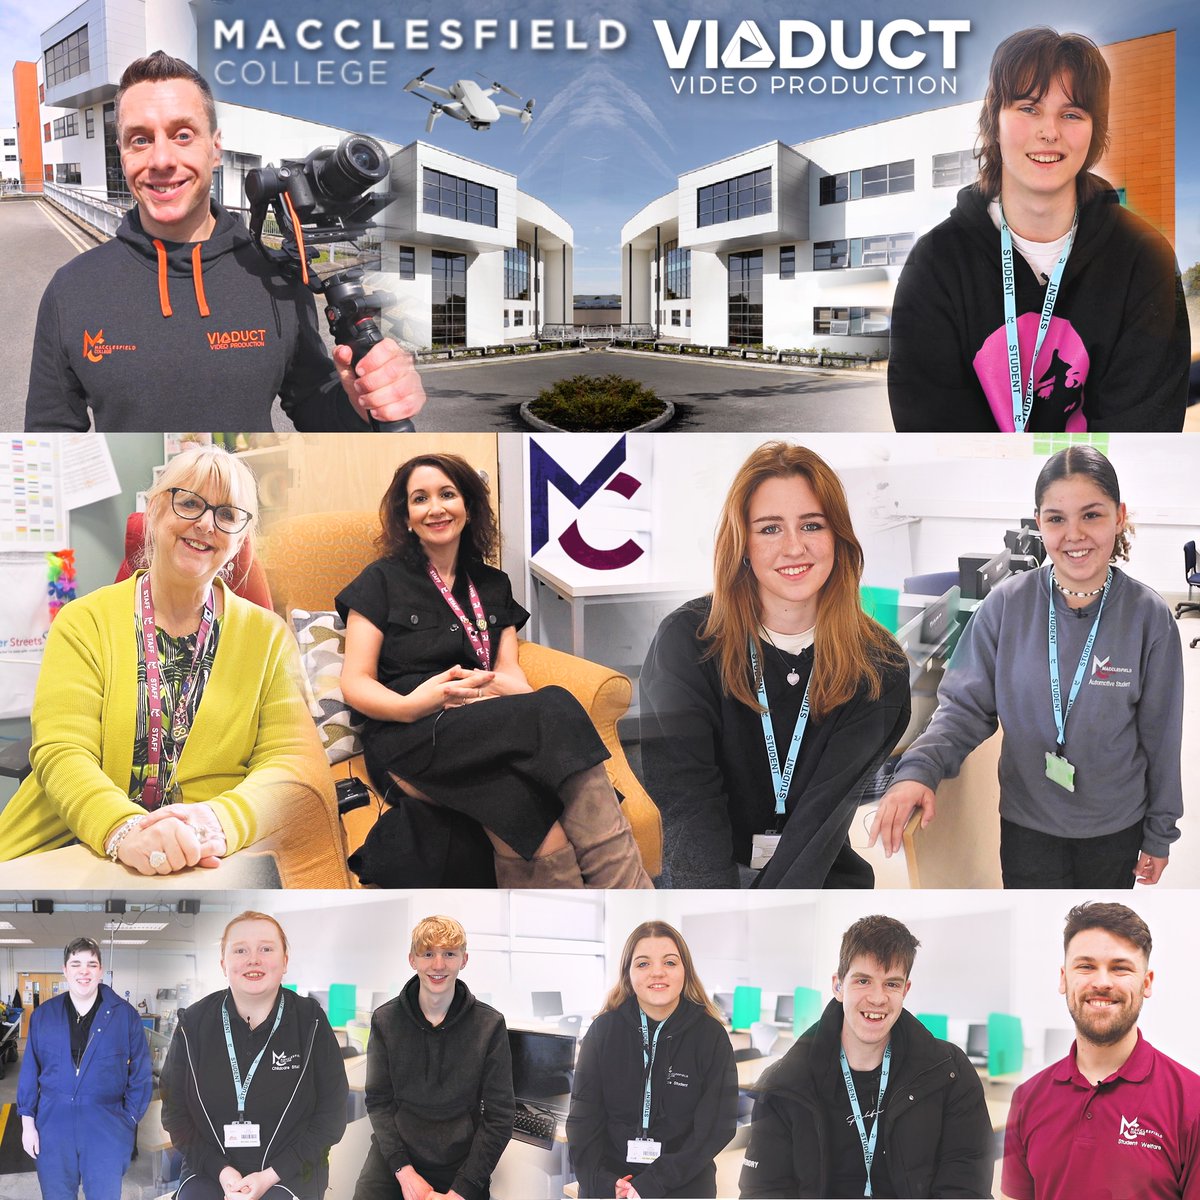 Tuesday filming 11 student & staff interviews for Macclesfield College #lovewhatyoudo #macclesfield #macclesfieldcollege